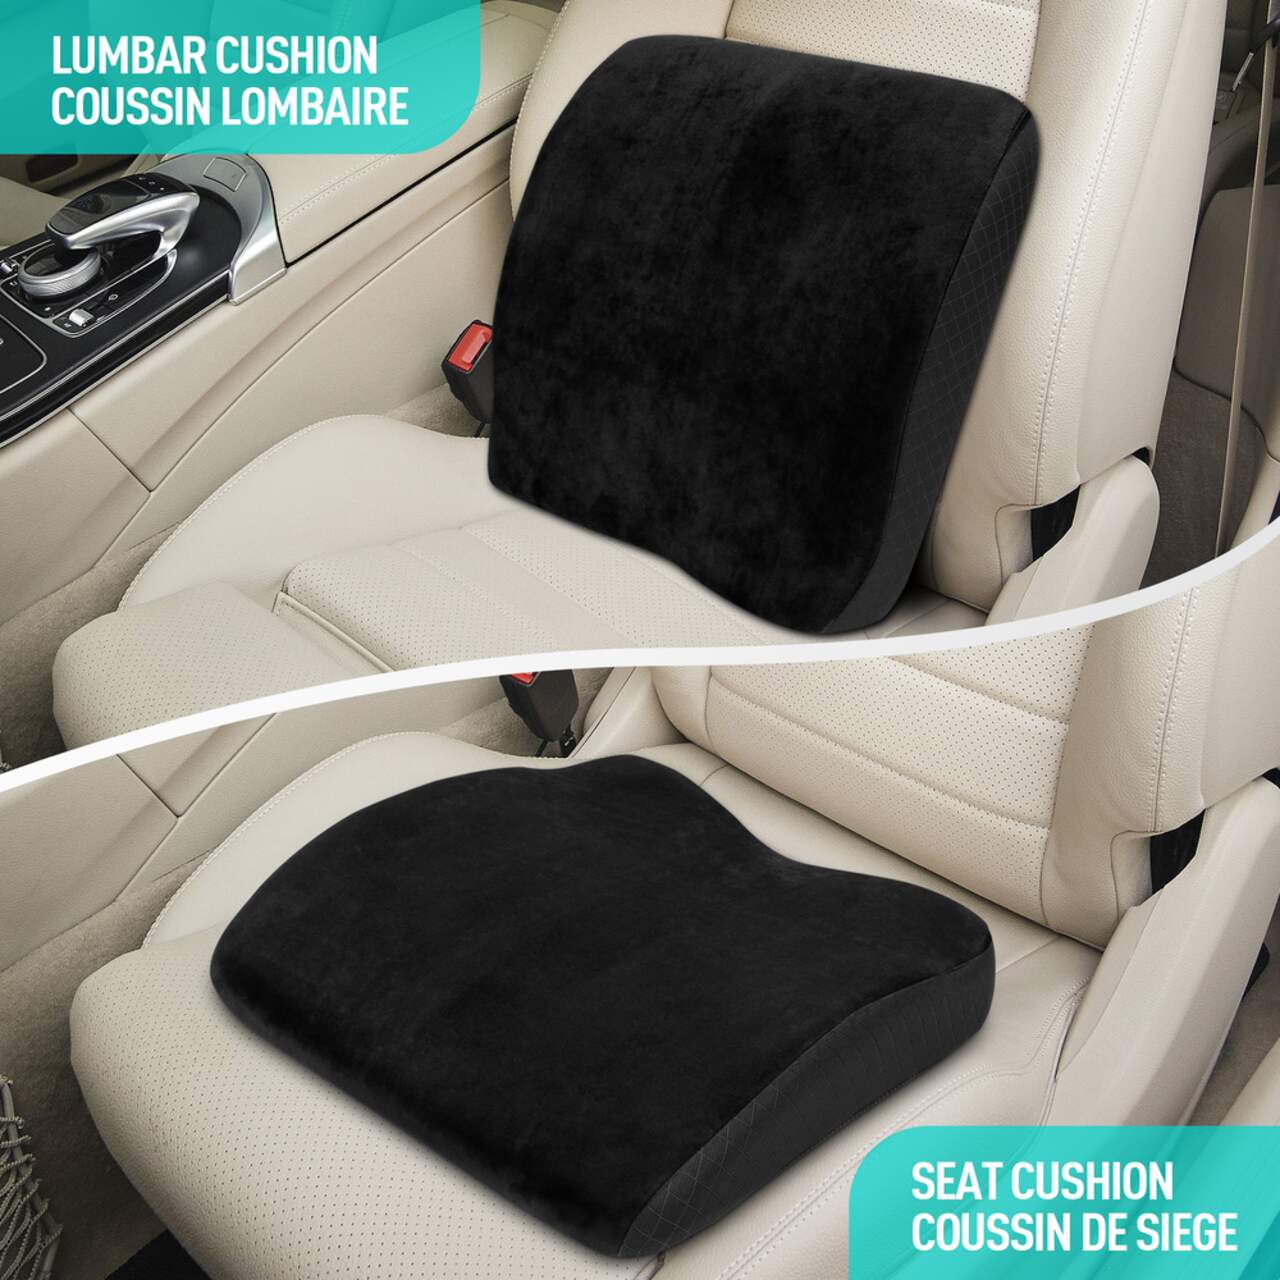 https://media-www.canadiantire.ca/product/automotive/car-care-accessories/auto-comfort/0326398/autotrends-2-in-1-lumbar-seat-cushion-6163c0ea-639b-4b92-8816-8a698c464906.png?imdensity=1&imwidth=1244&impolicy=mZoom